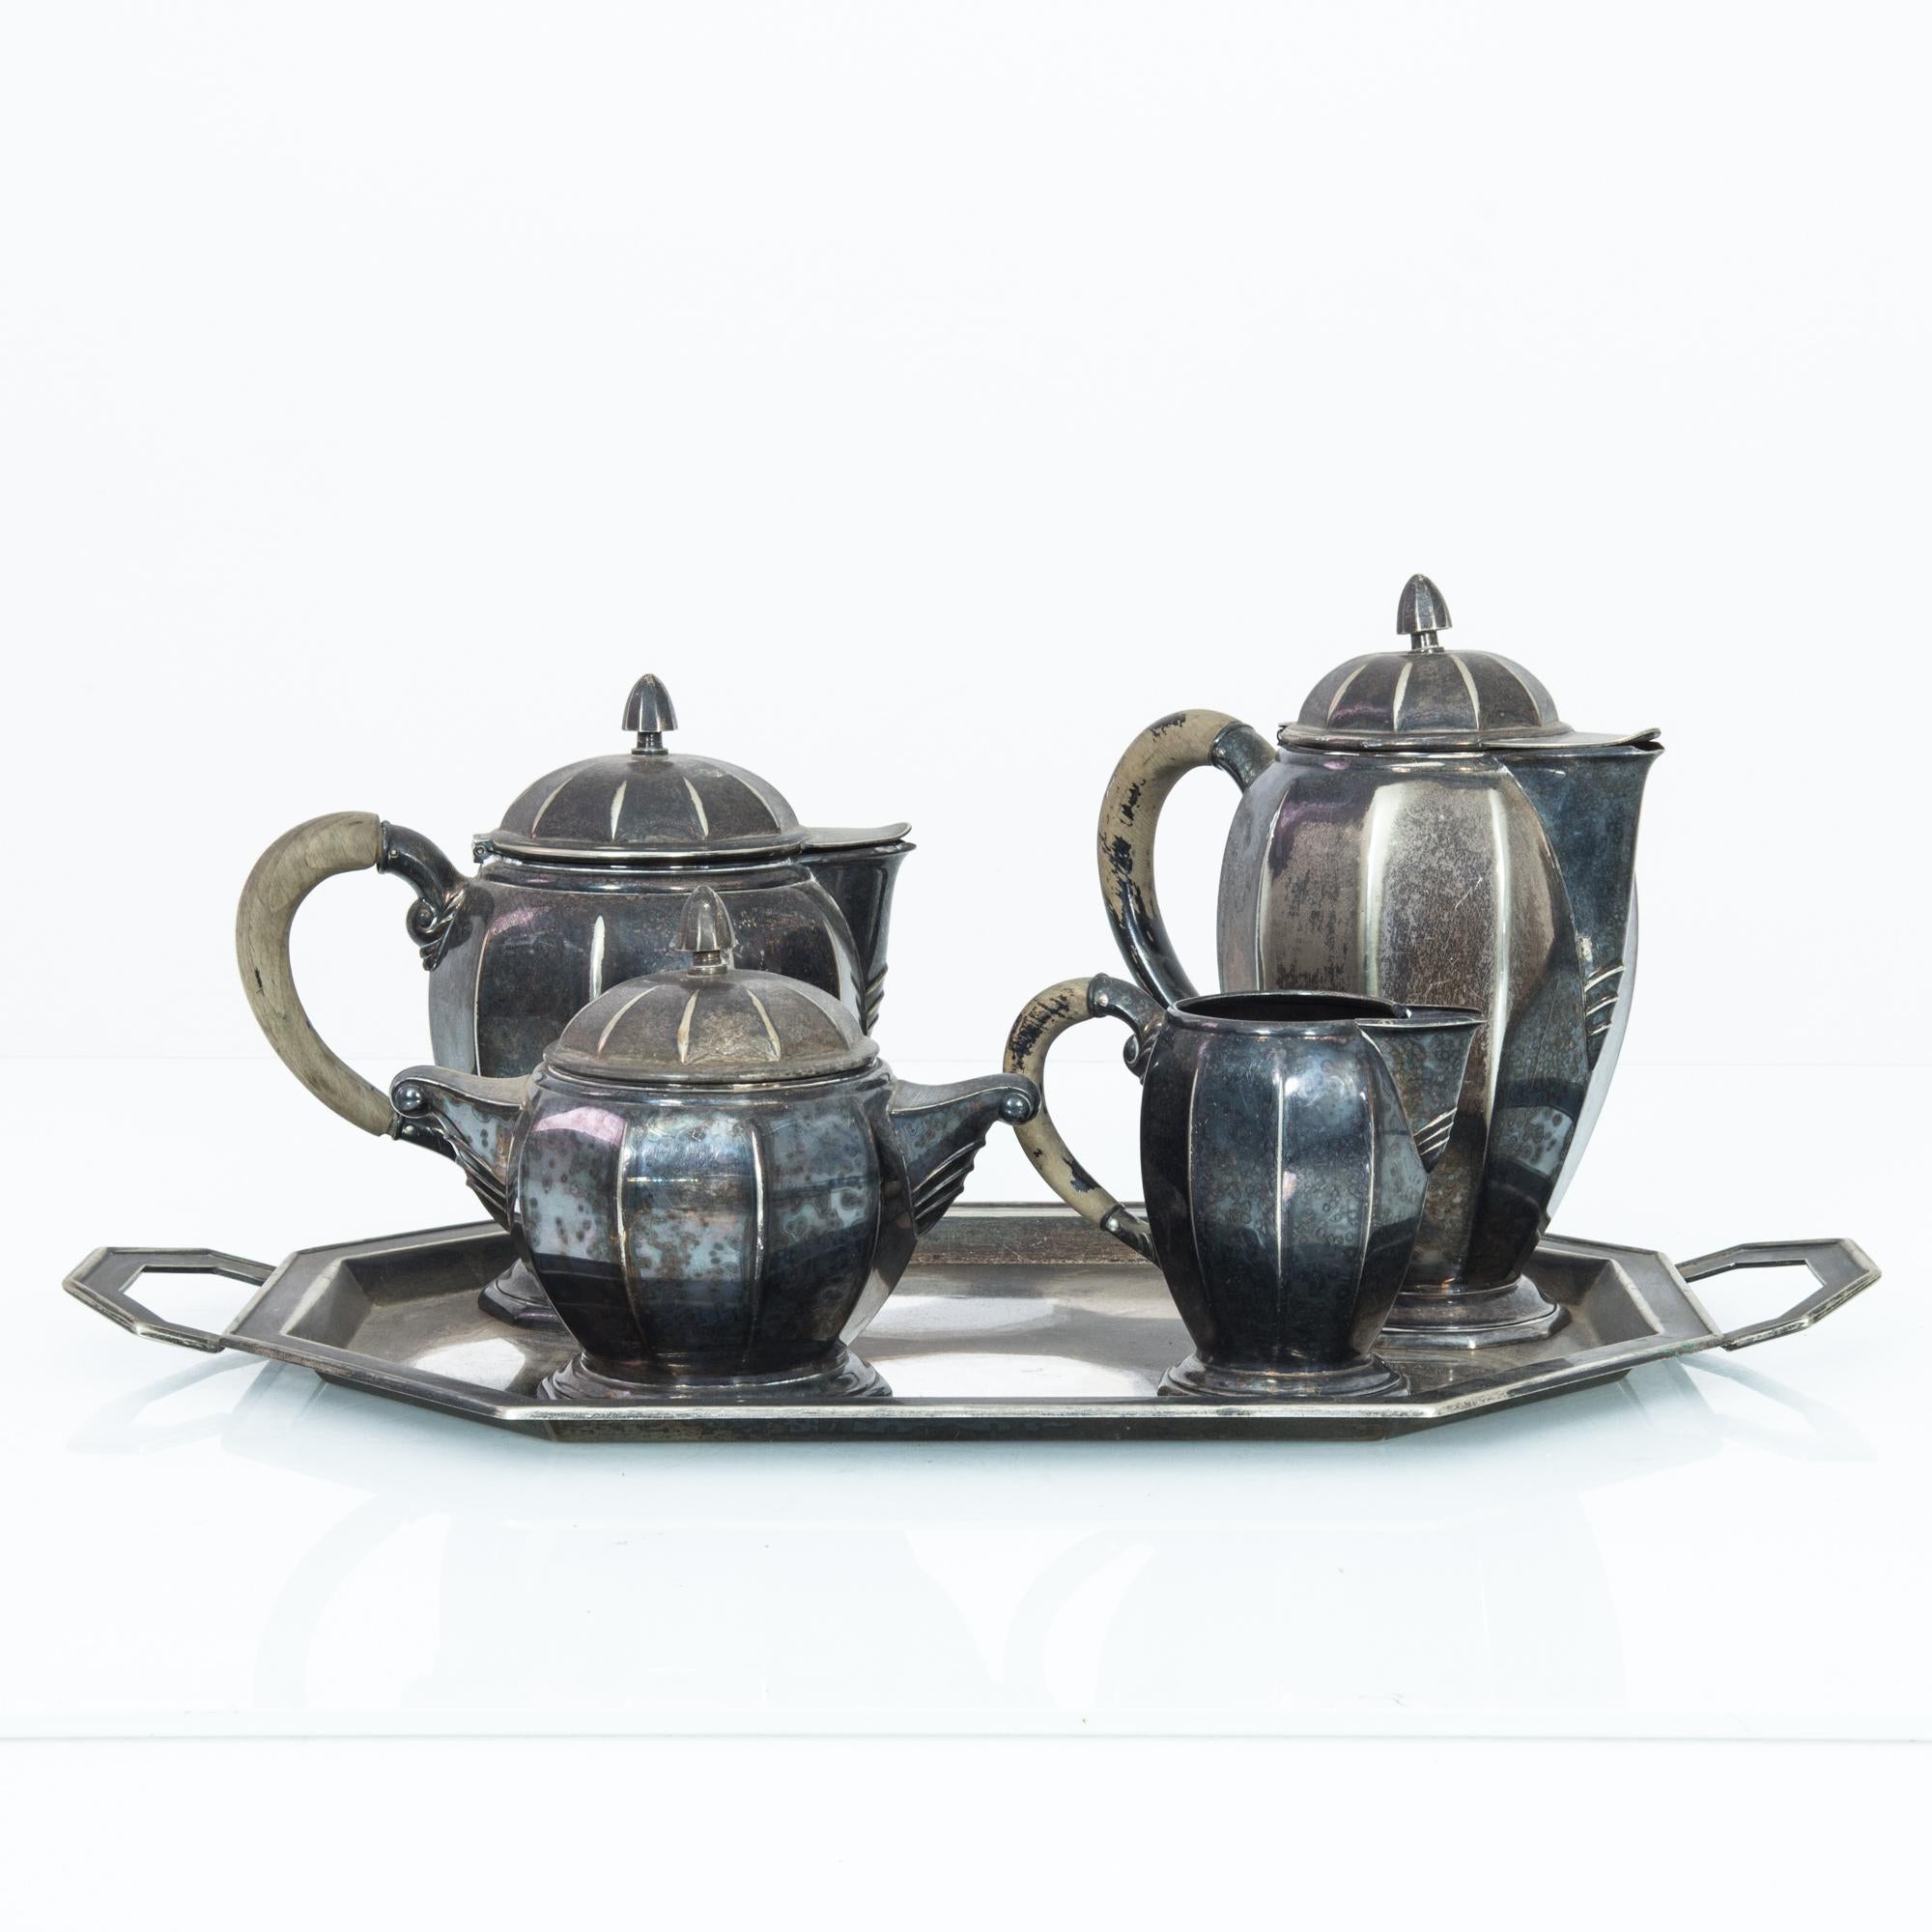 A five piece metal coffee set from Belgium, produced circa 1940. Old word nobility meets angular Art Deco in this coffee set featuring a coffee pot, teapot, sugar bowl, and milk pitcher, all placed upon a metal tray. A set so stunning, it strikes